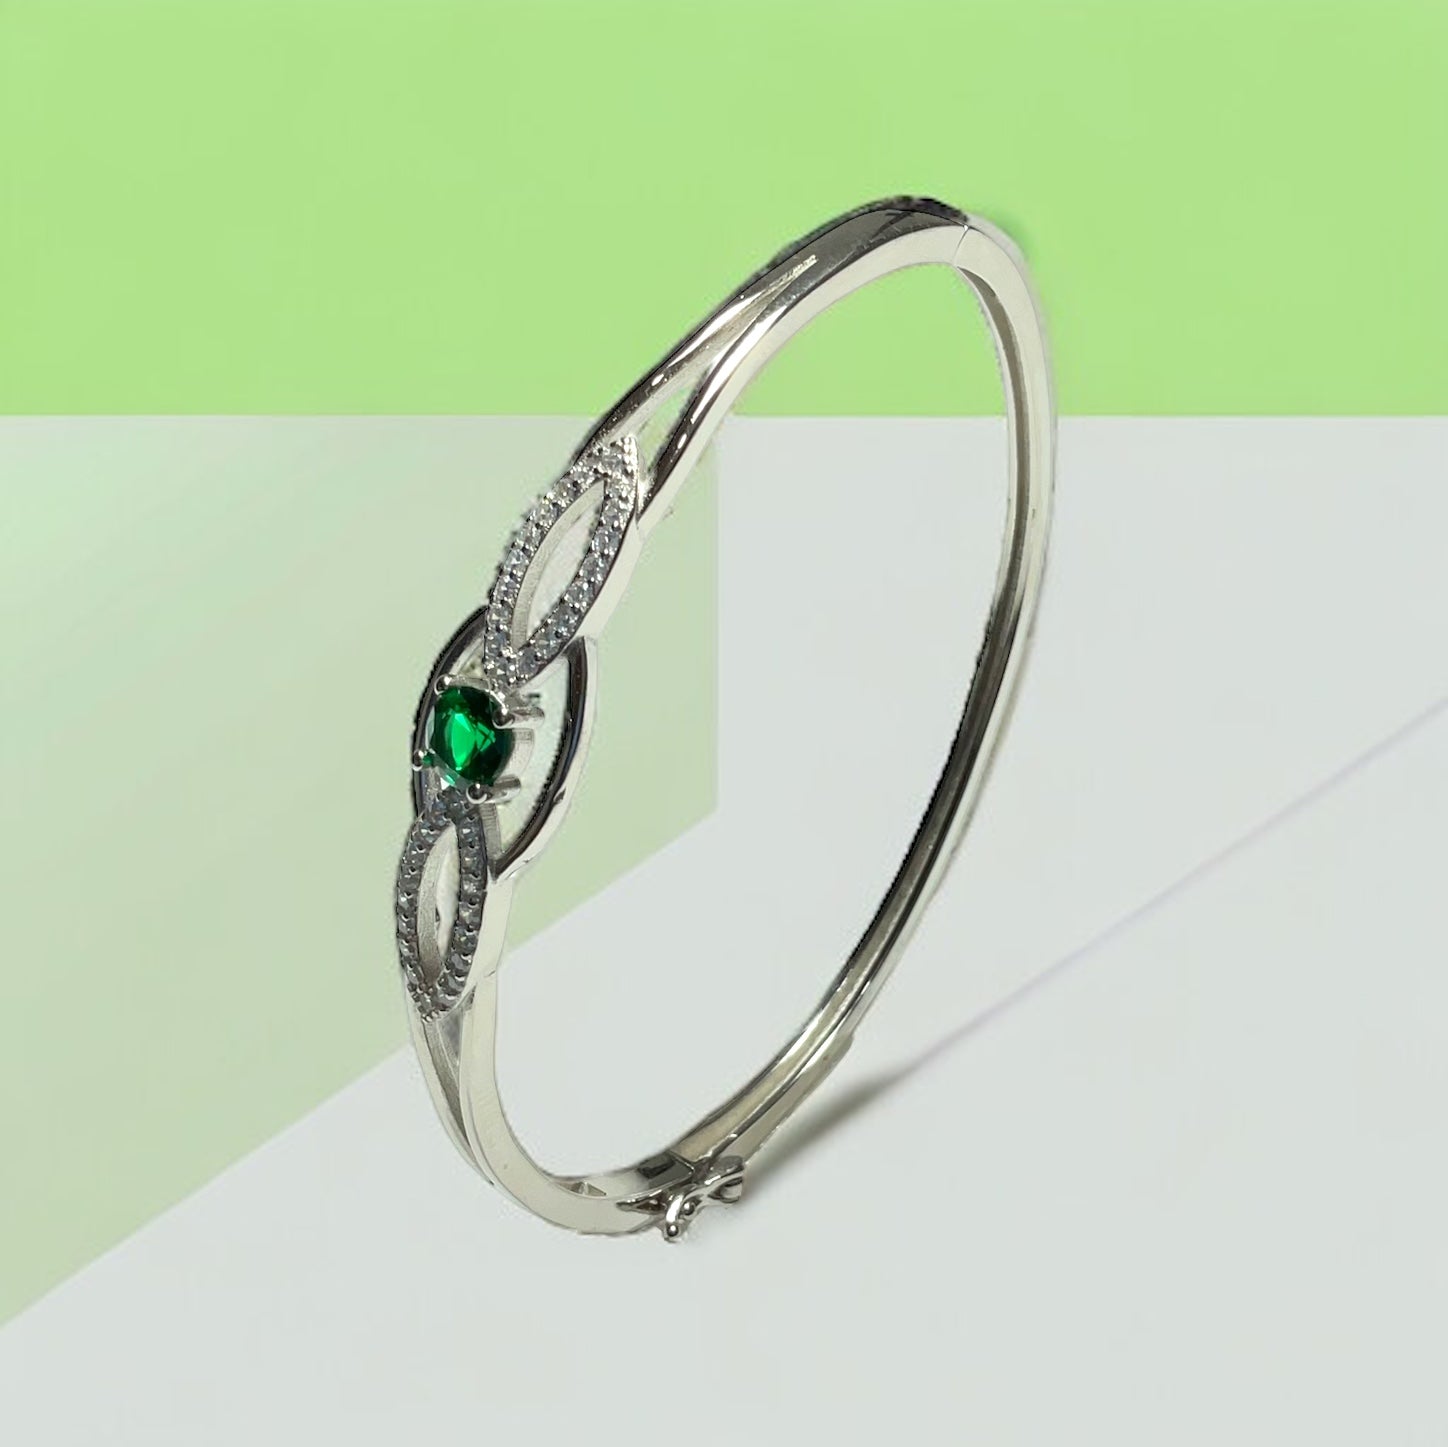 a white gold ring with a green stone